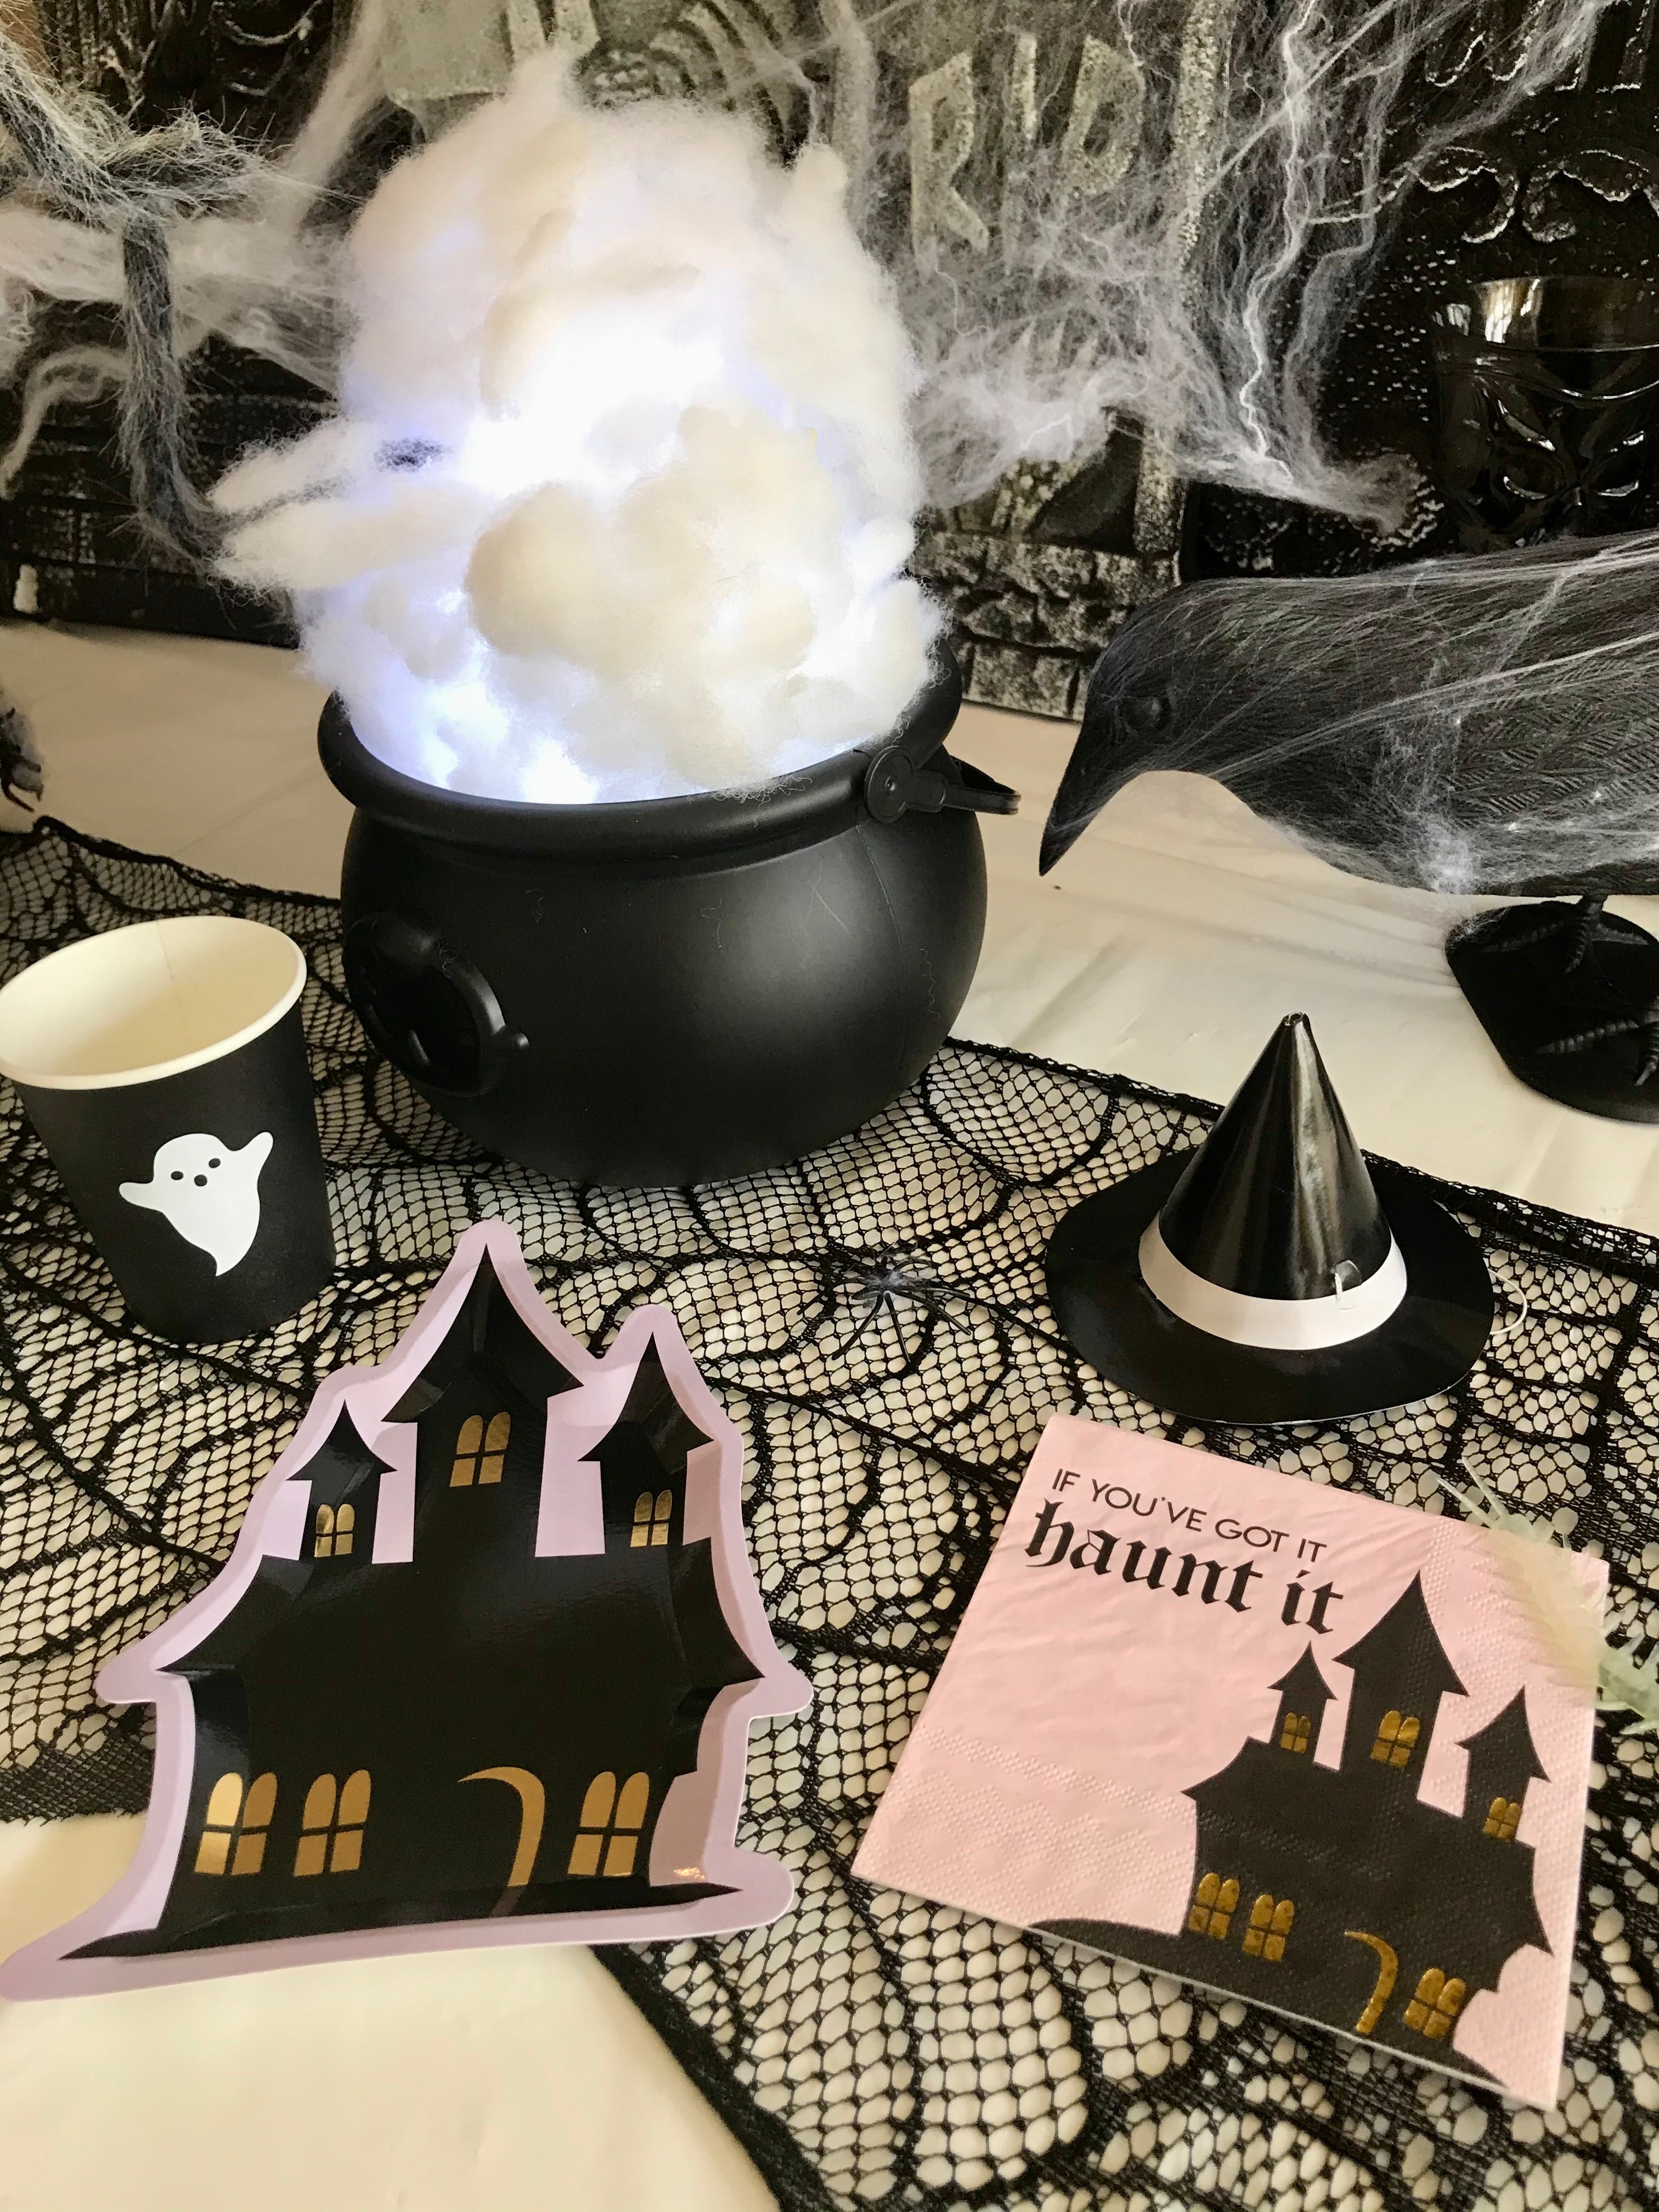 Mini witch party hats halloween